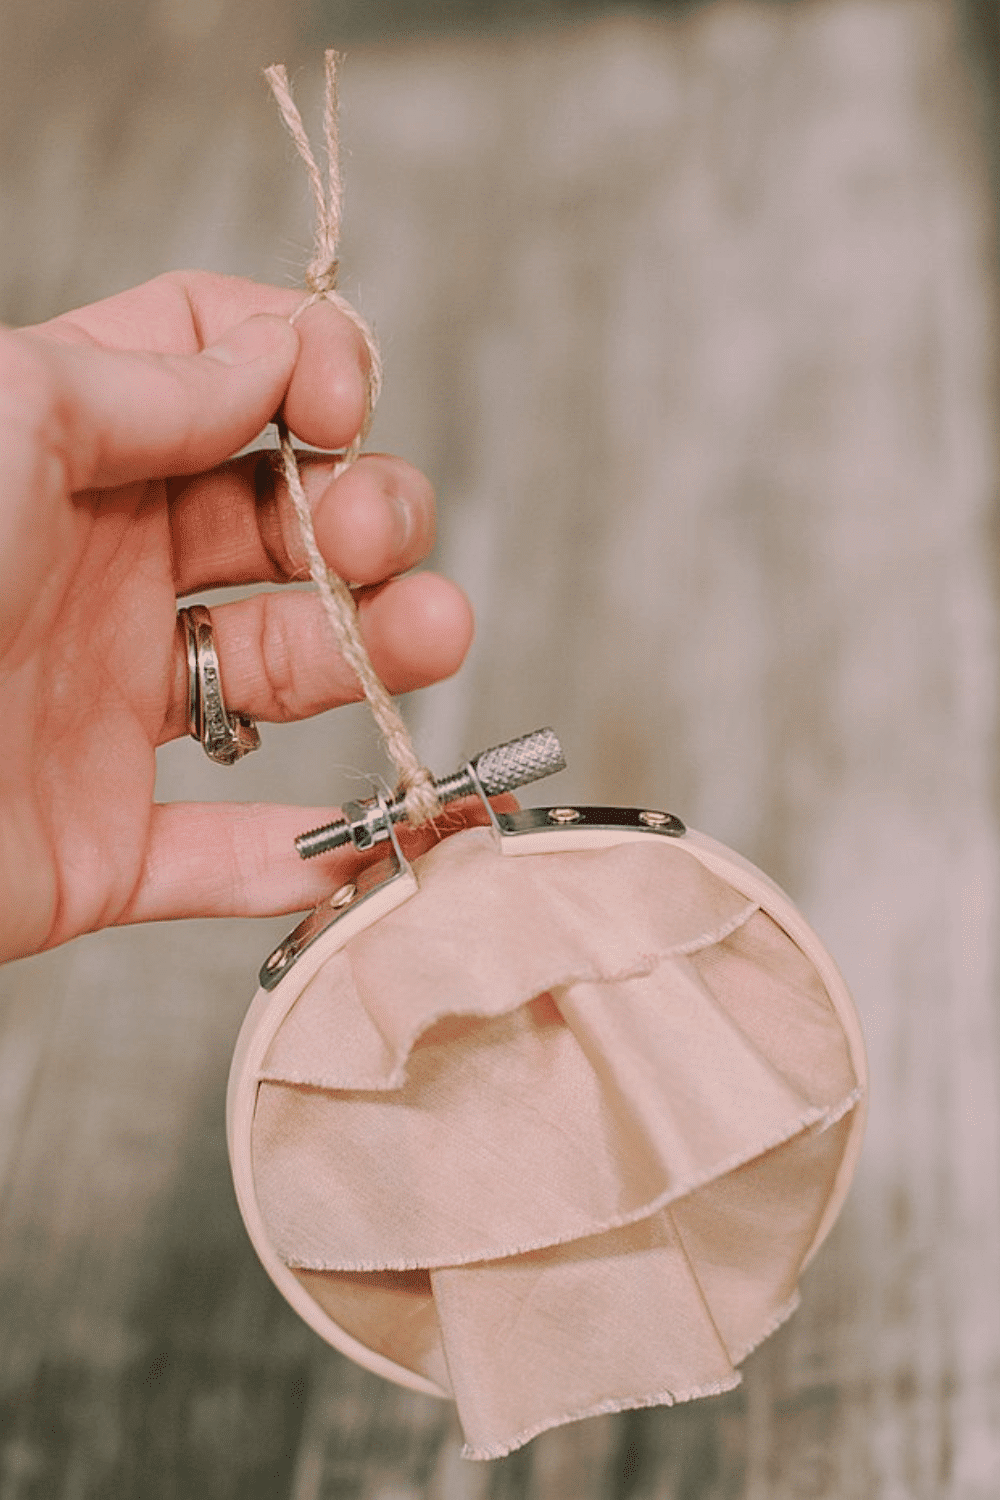 How to Make a Keepsake Memory Ornament with Fabric and Hoop